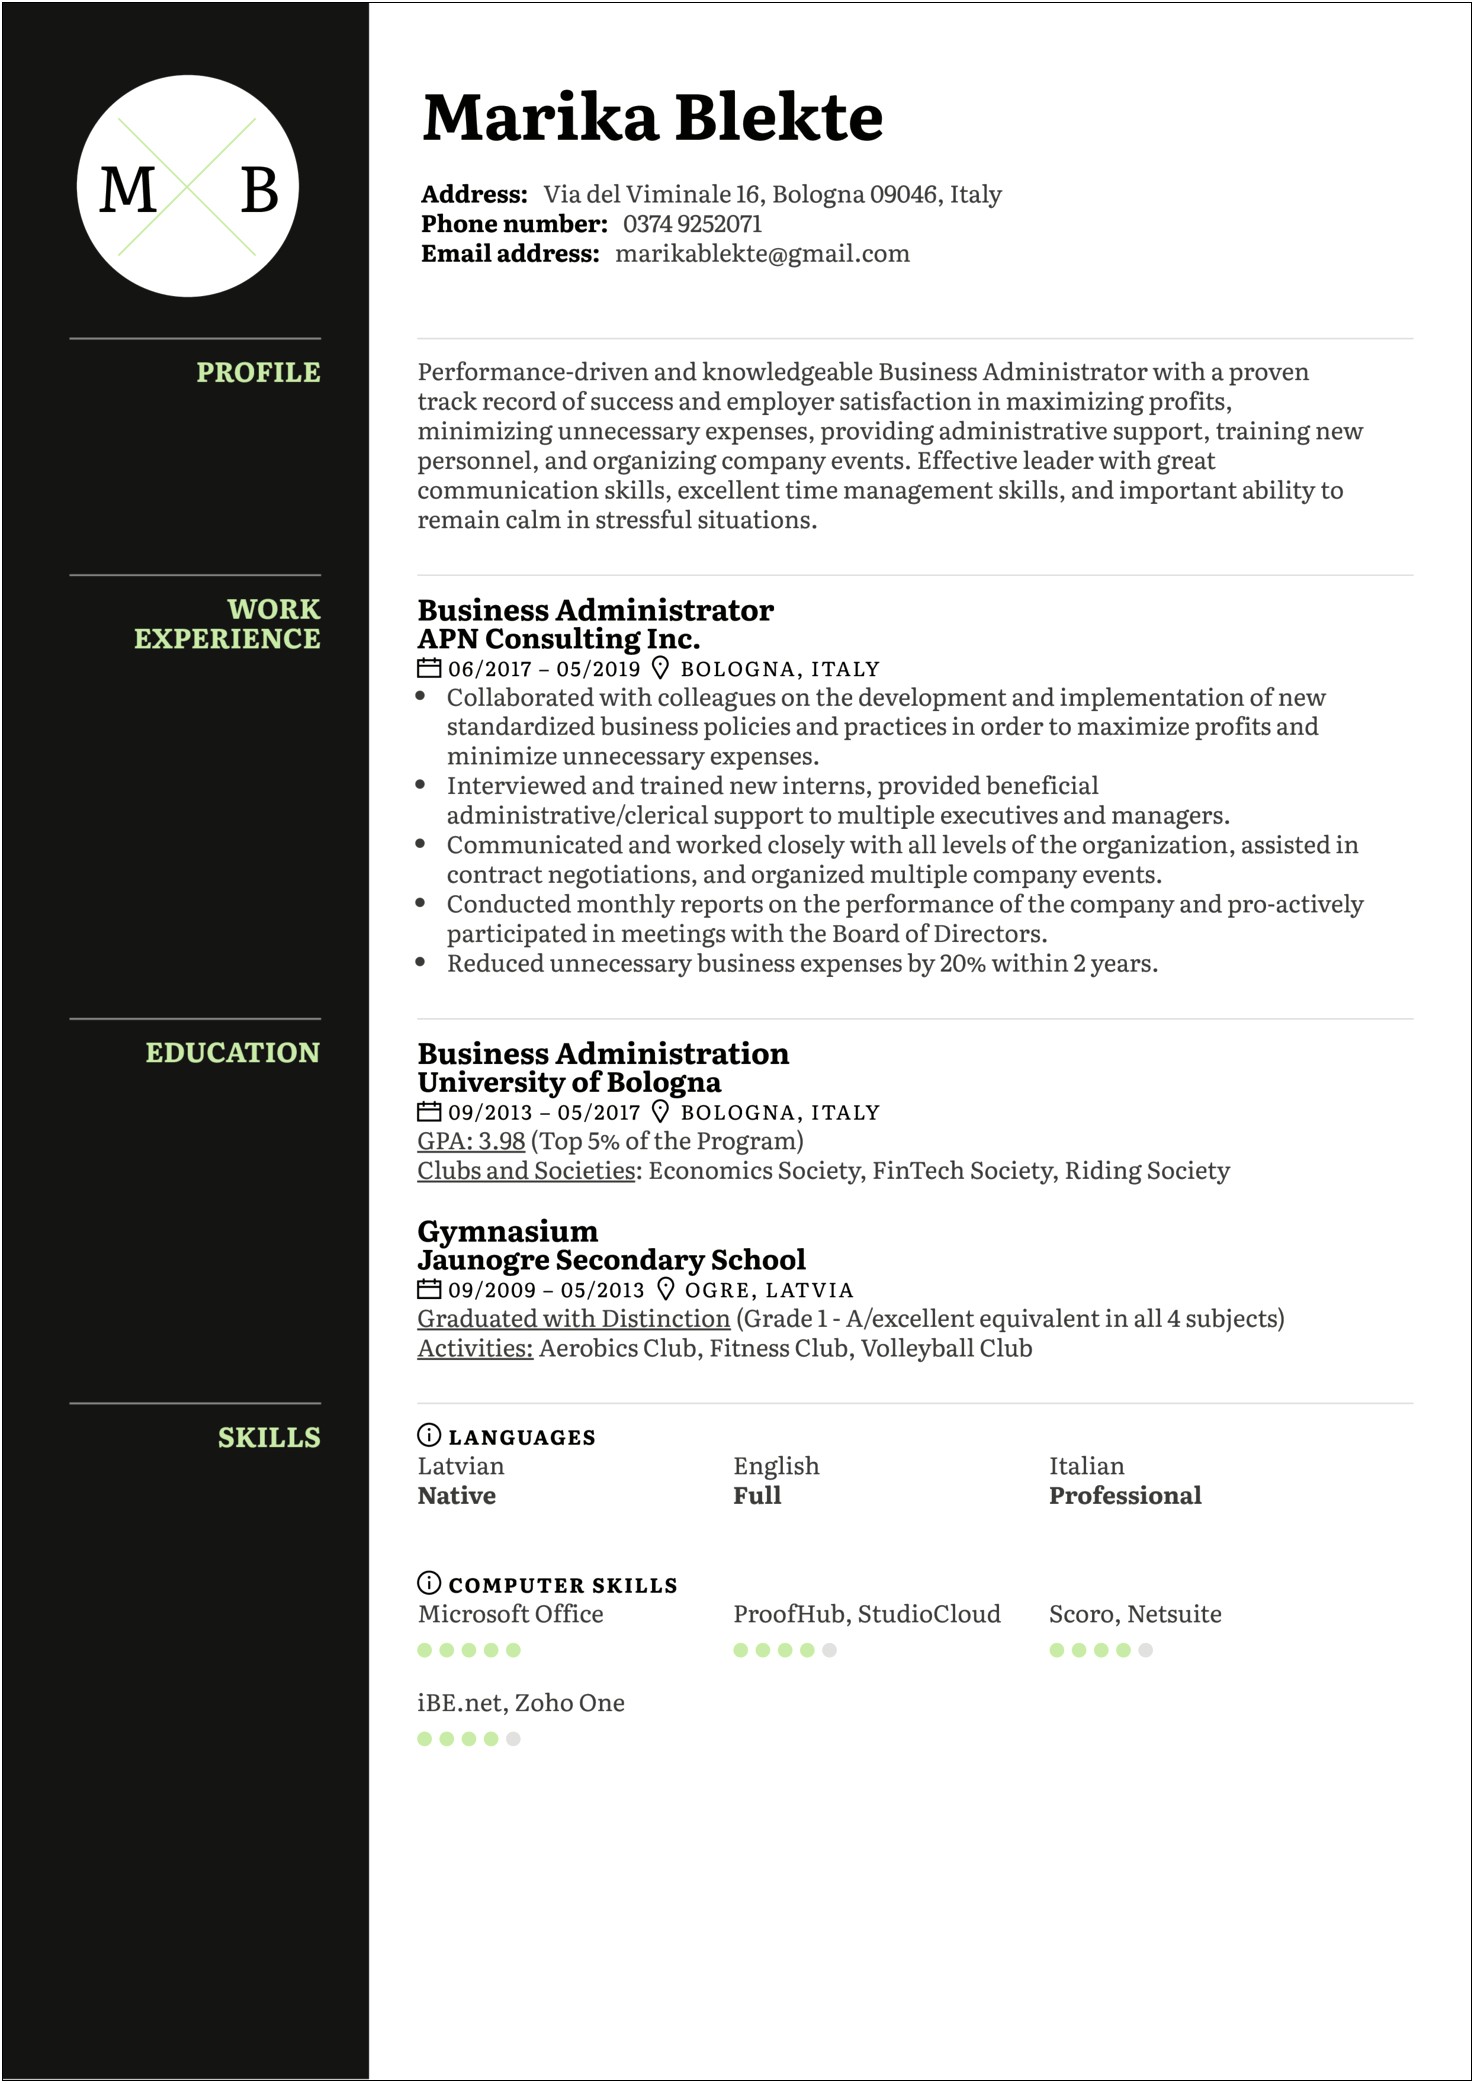 Sample Resume For Business Administration Student